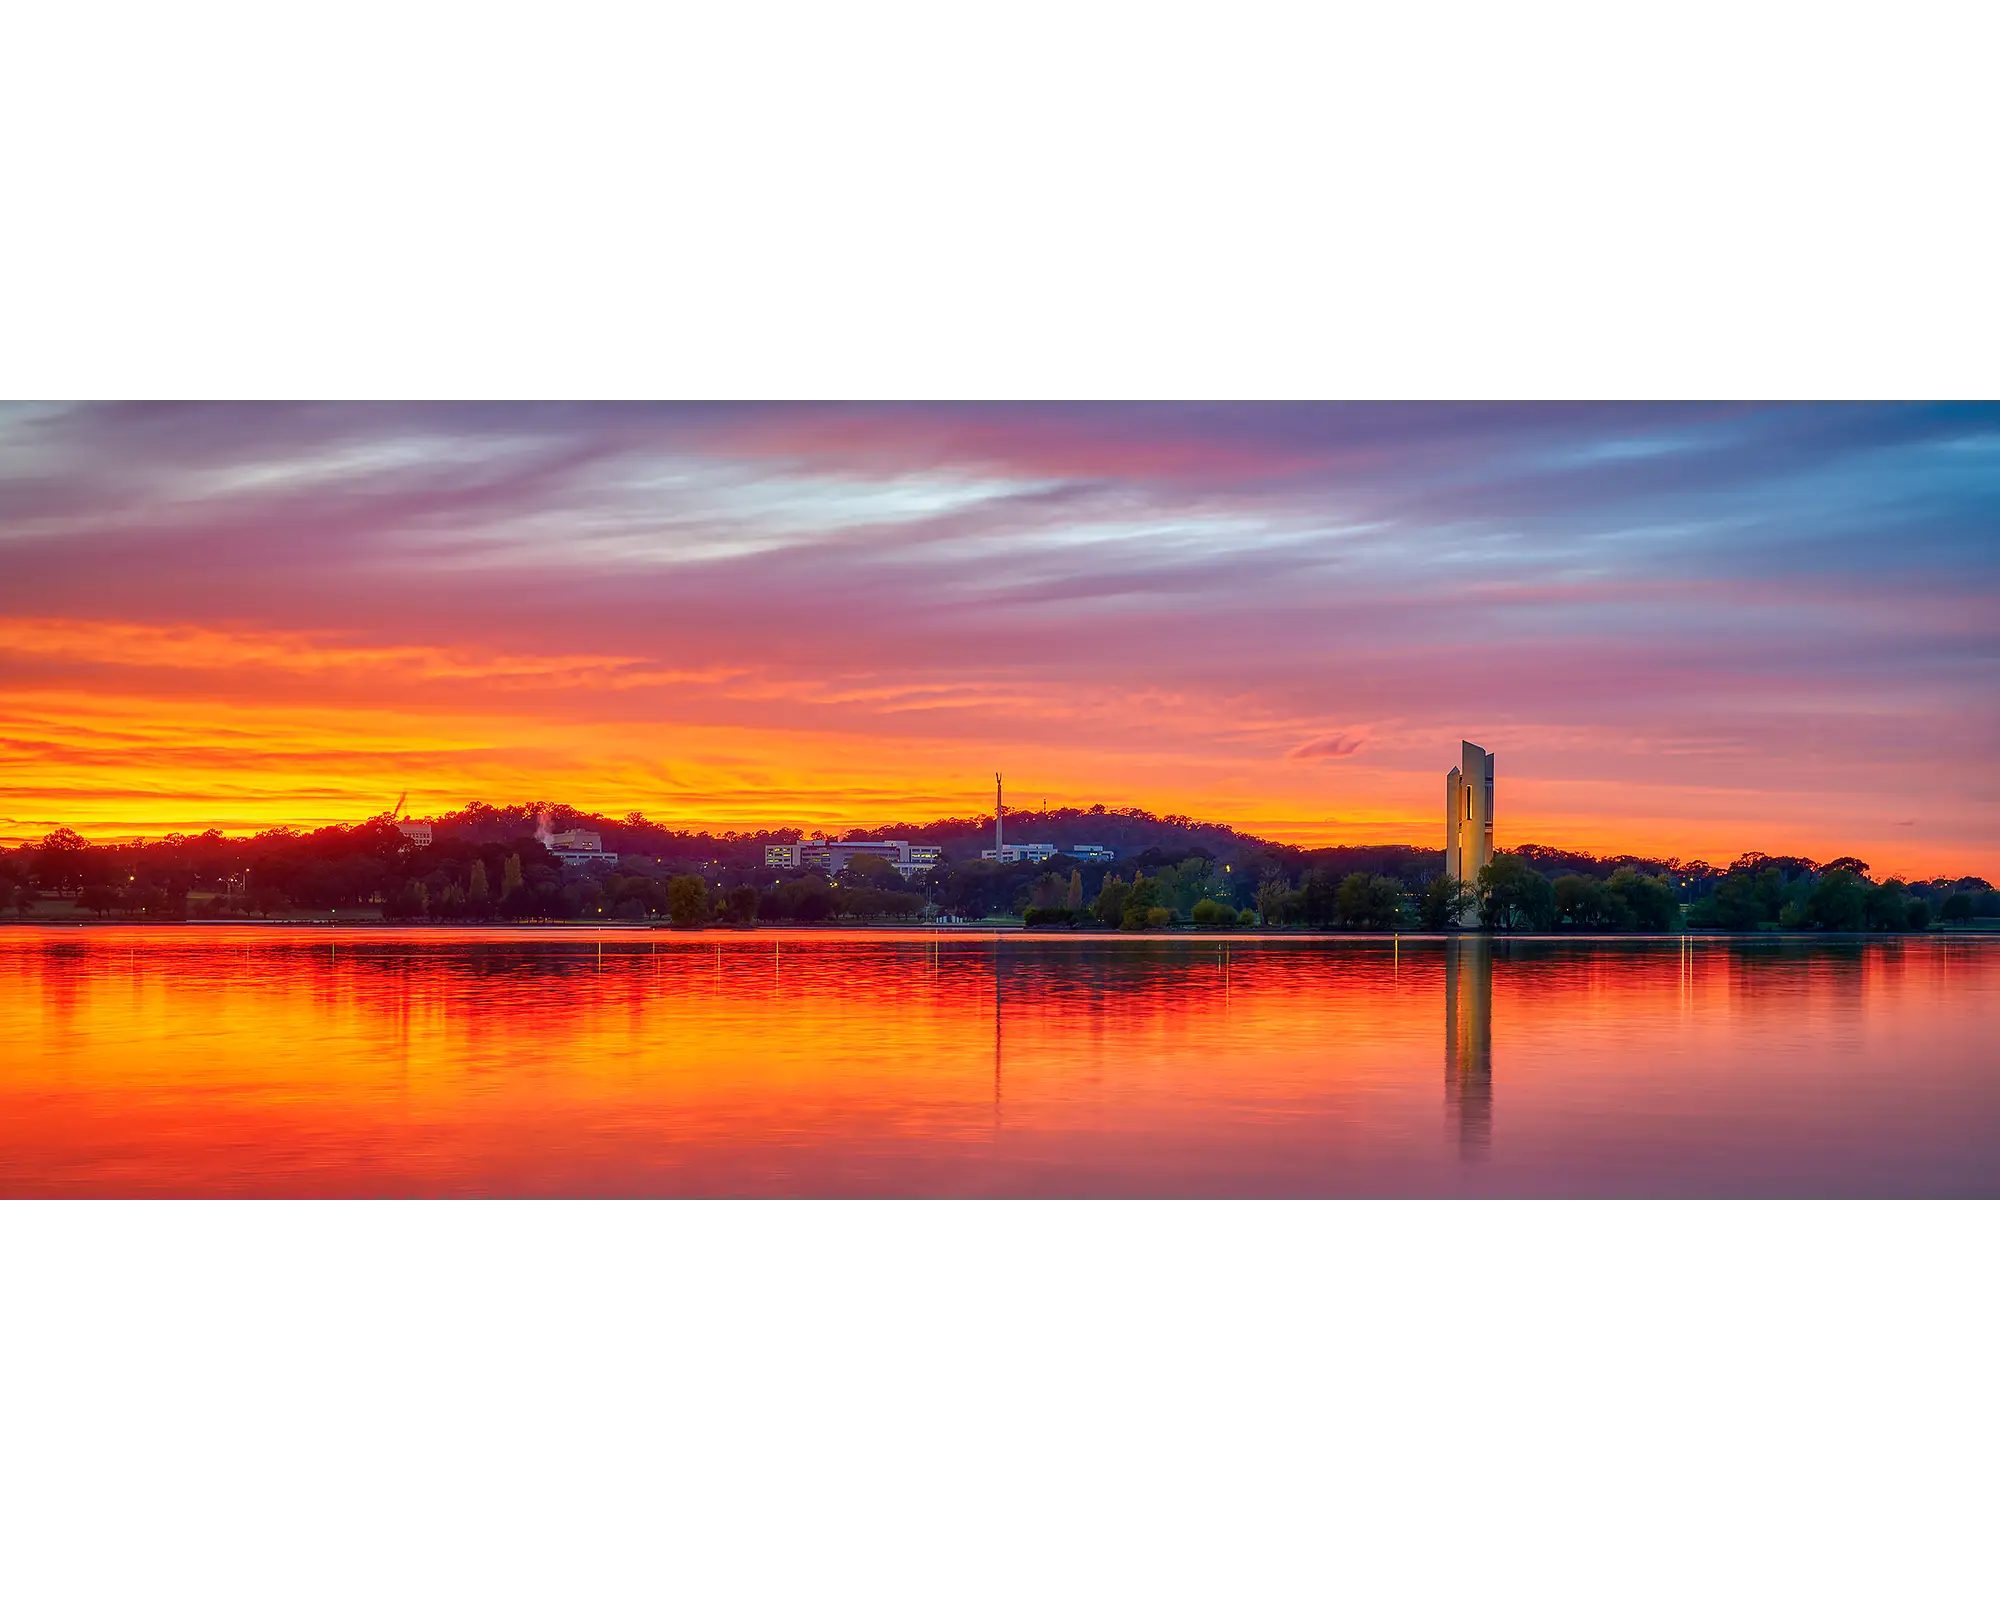 Scarlet sunrise over Rusell Office and Lake Burley Griffin in Canberra.